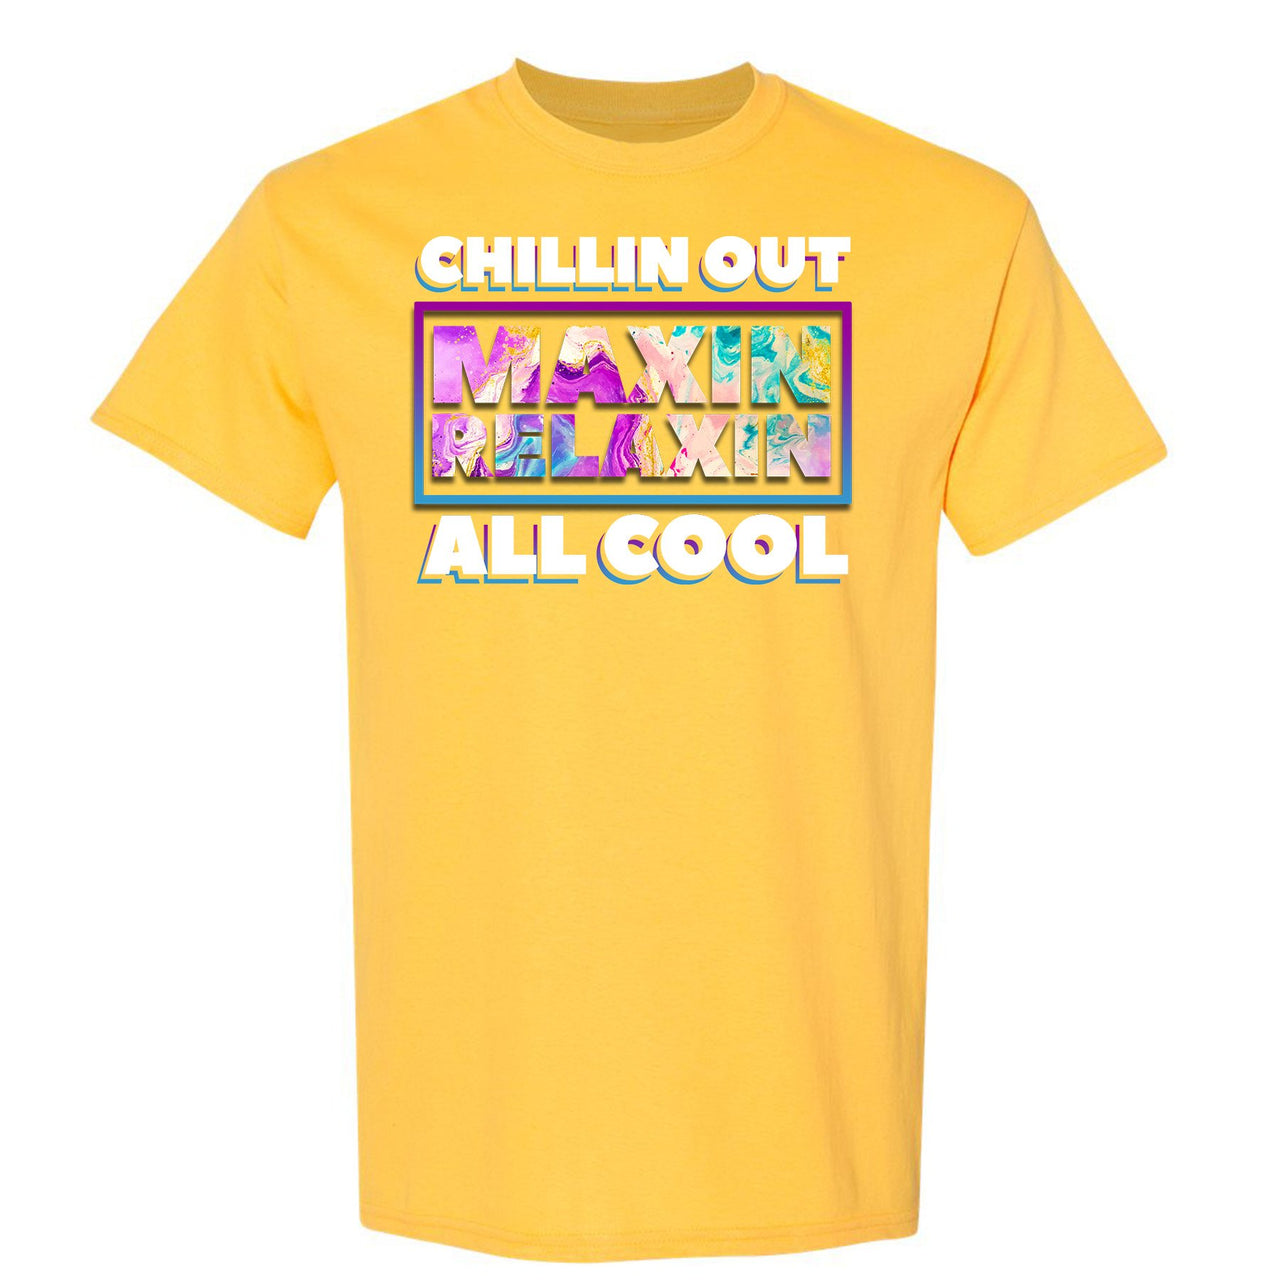 White Aqua 8s T Shirt | Chillin Out Maxin Relaxin All Cool, Daisy